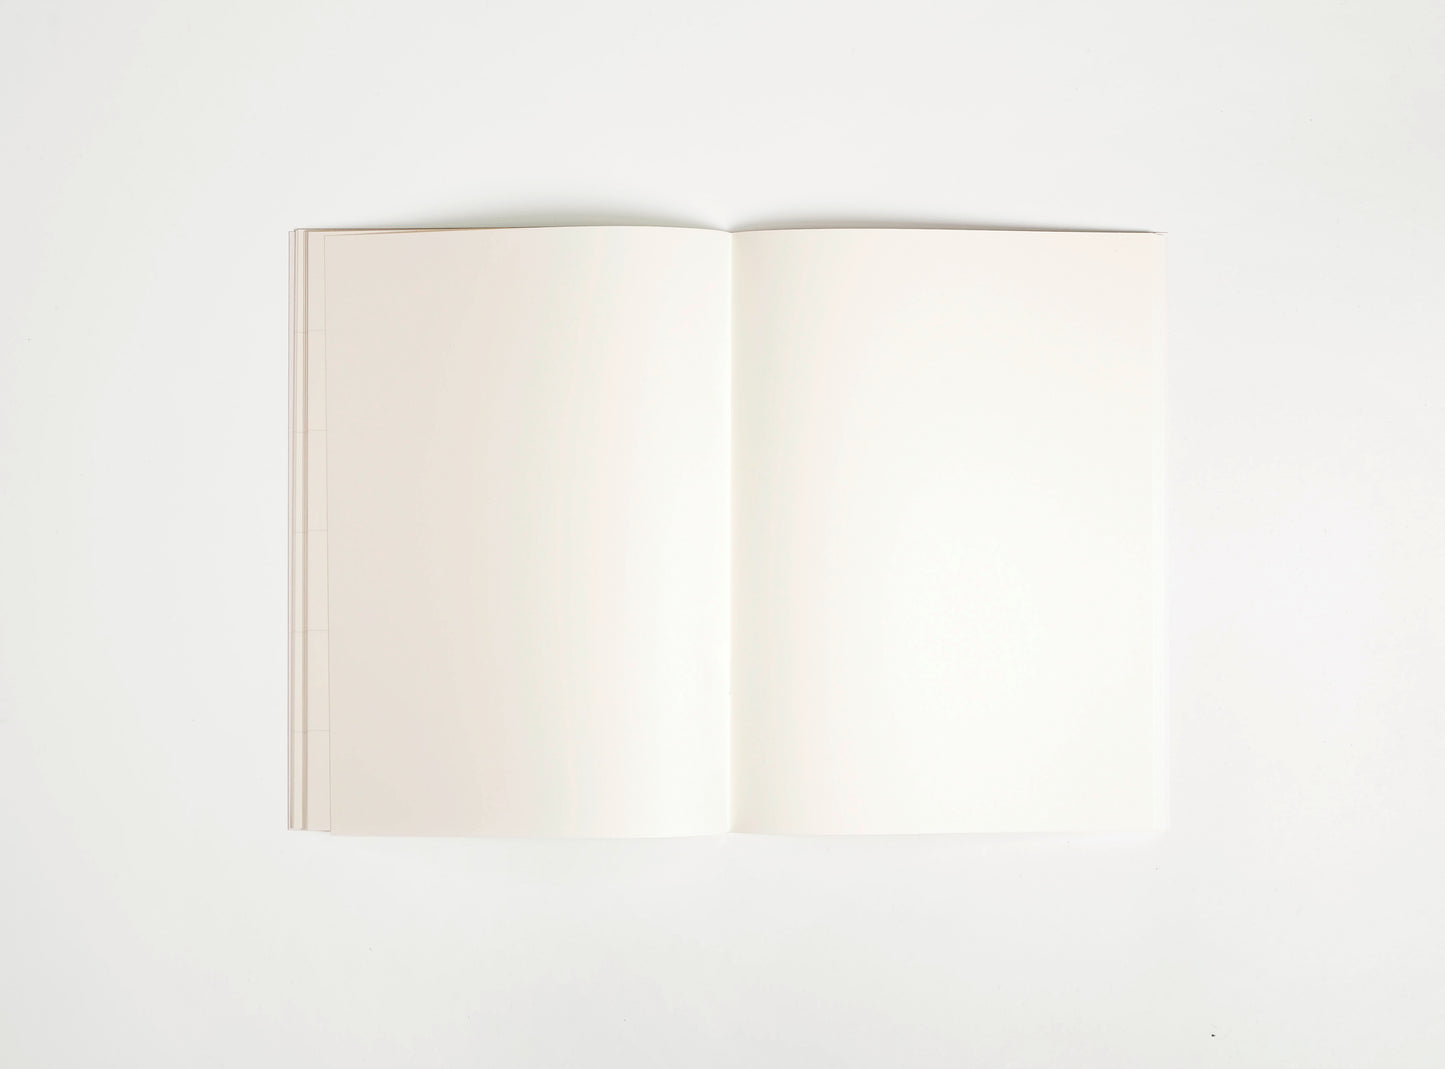 booq / a double-sided notebook - Style B: 4x6 frames | plain